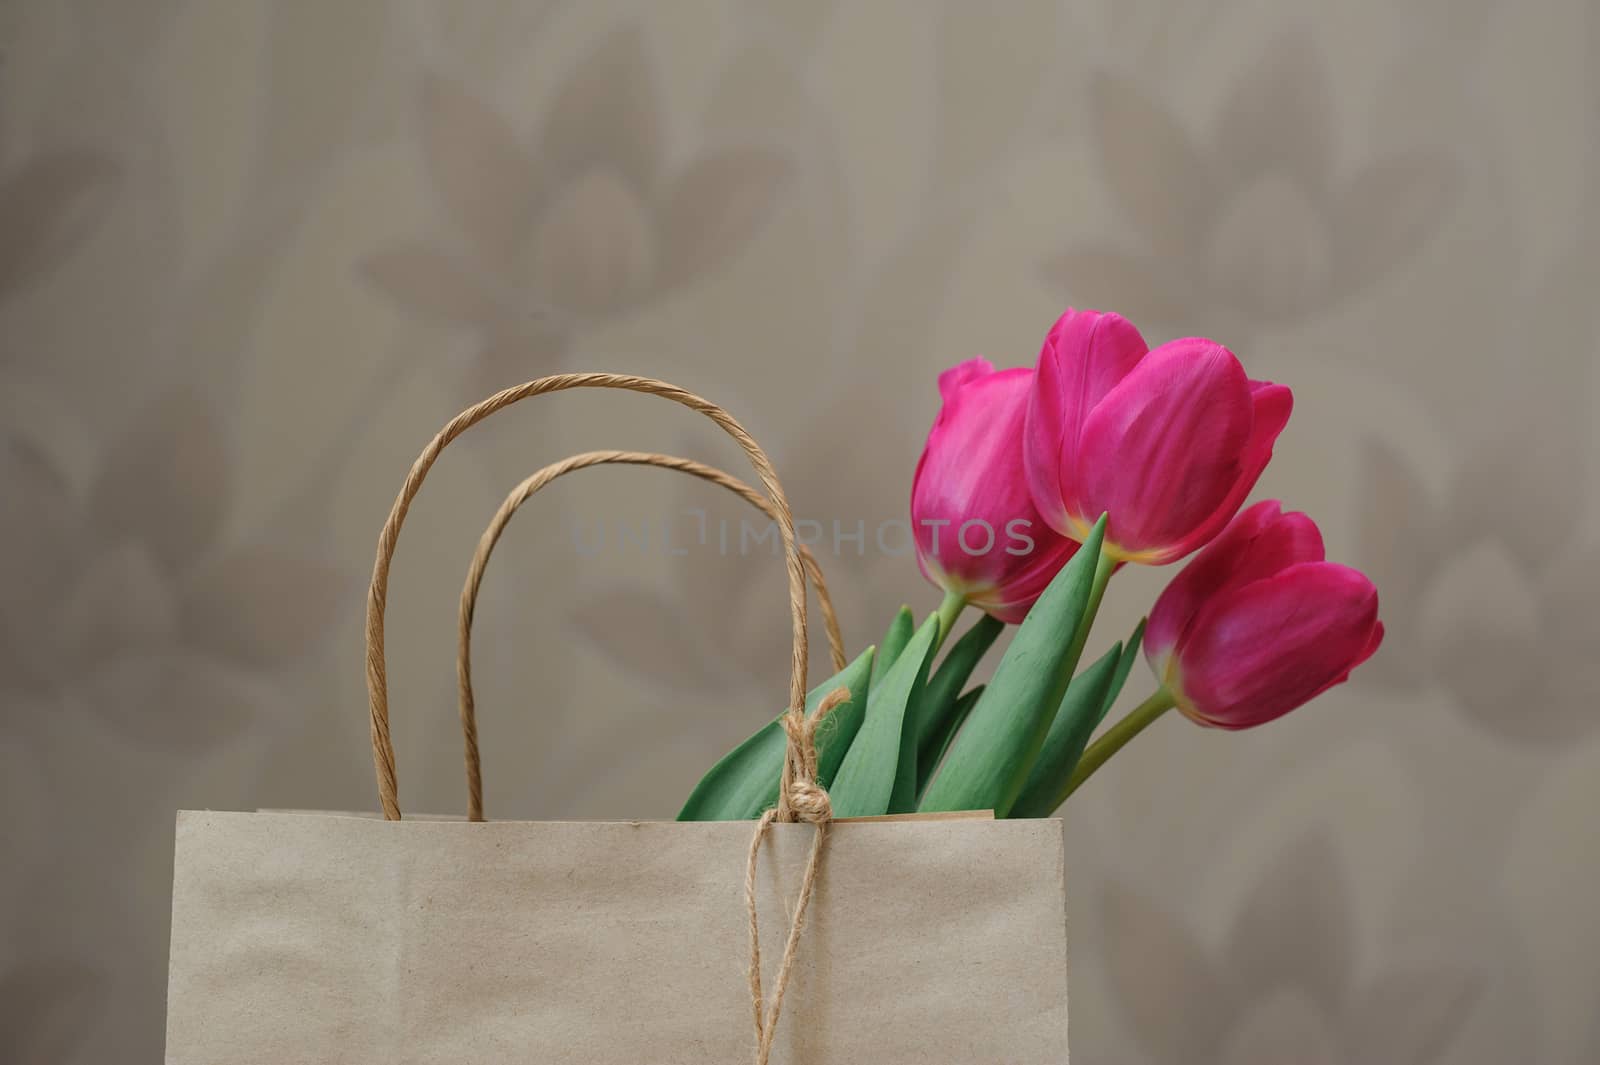 bouquet of red tulips in paper kraft bag